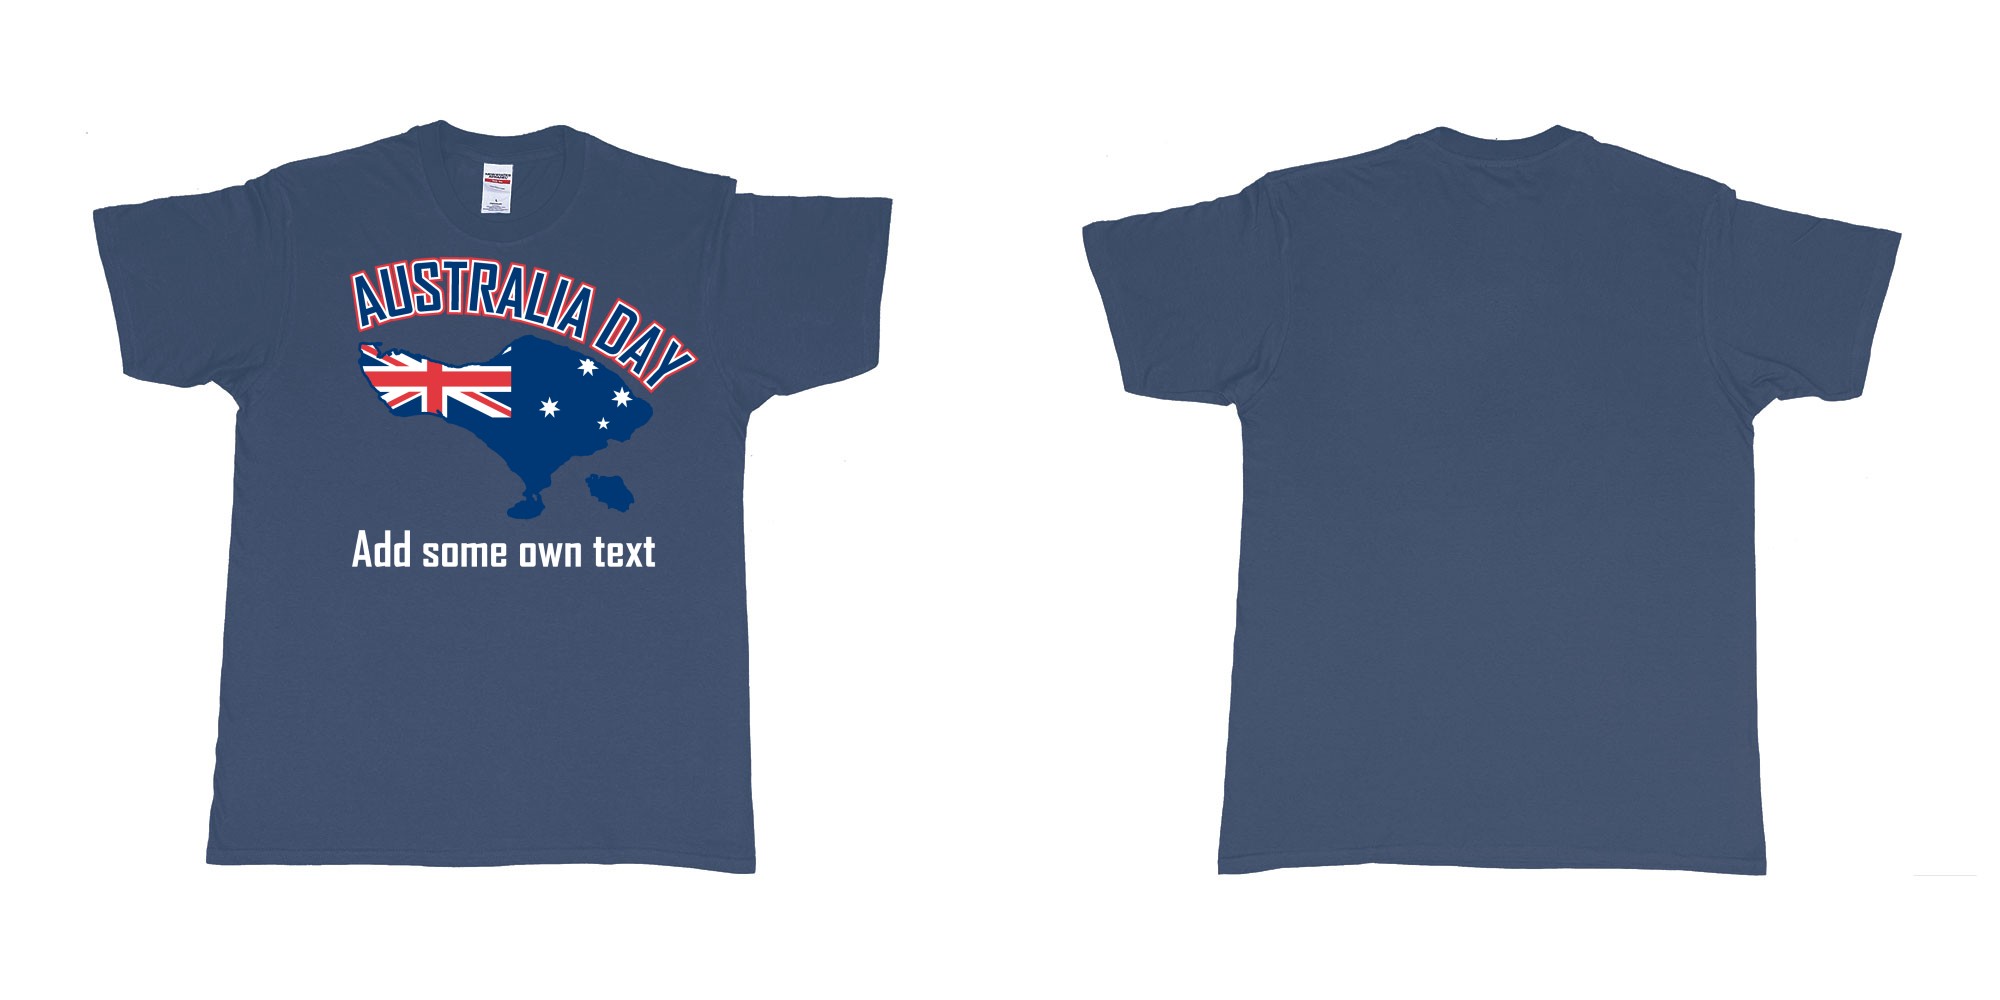 Custom tshirt design australia day in bali custom teeshirt printing in fabric color navy choice your own text made in Bali by The Pirate Way